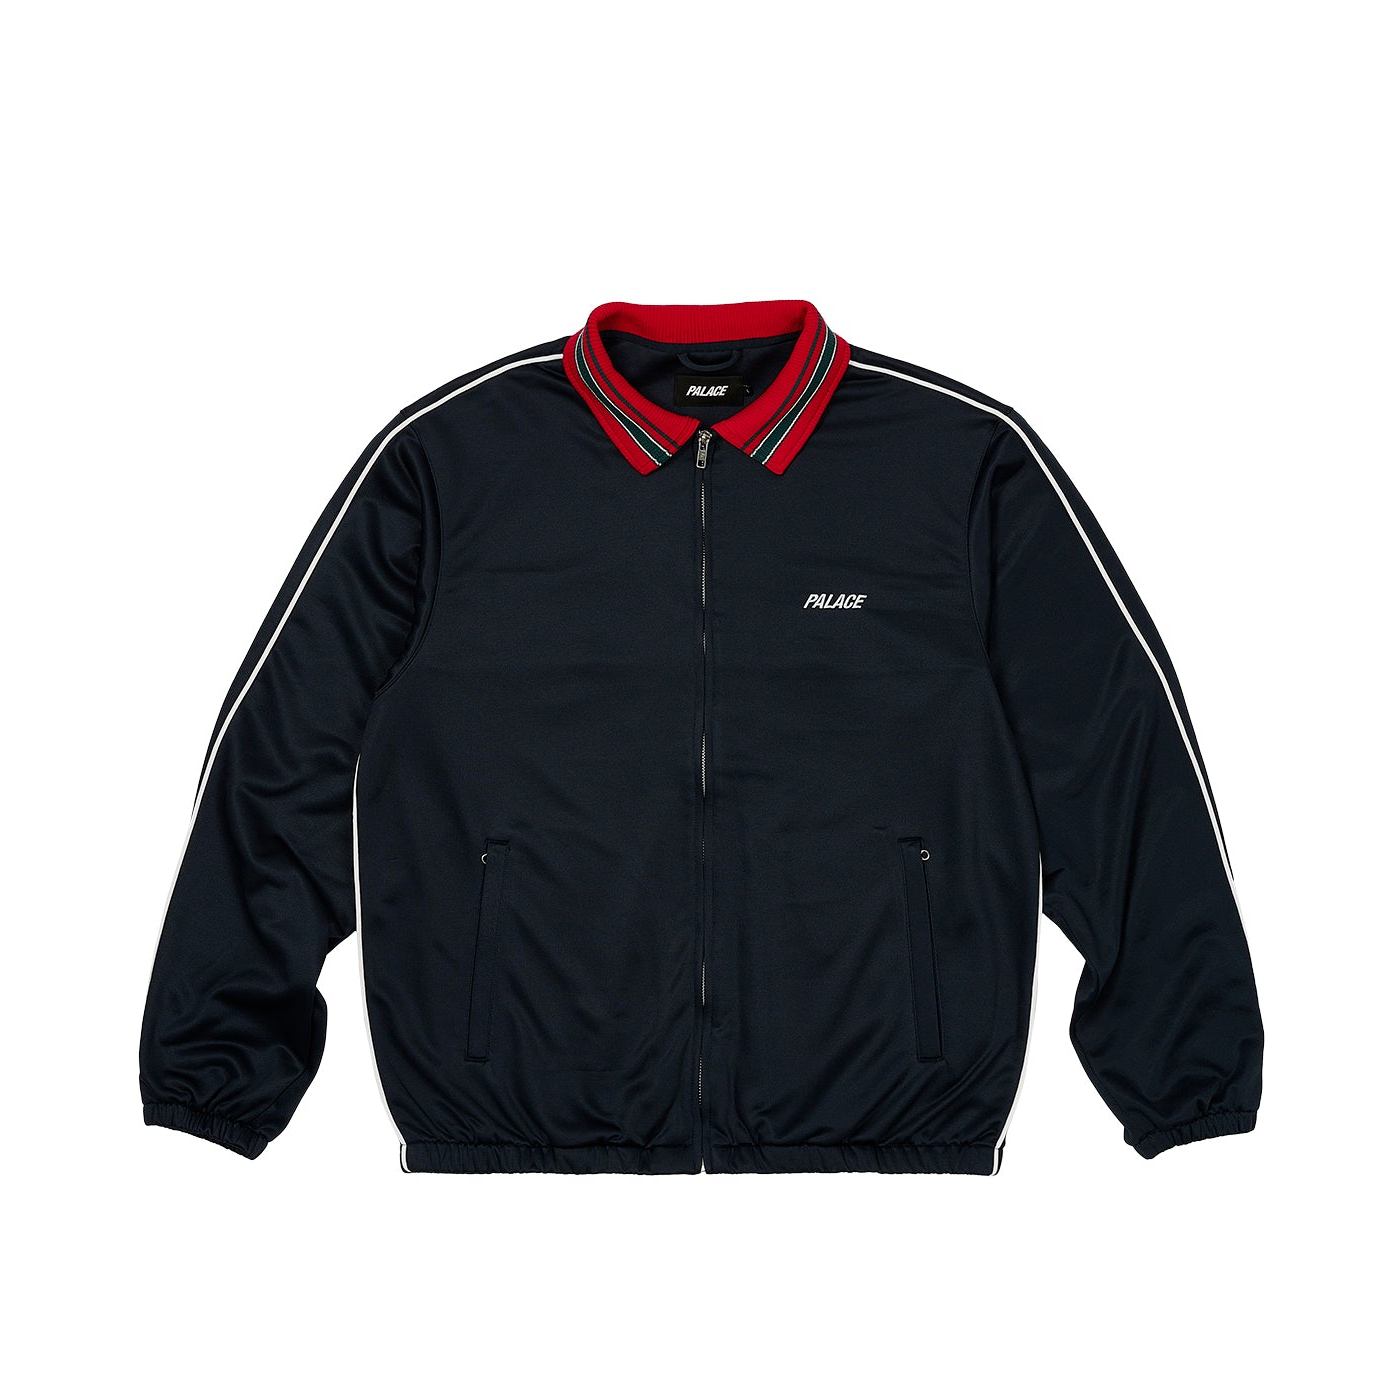 Thumbnail ULTRA RELAX TRACK JACKET NAVY one color